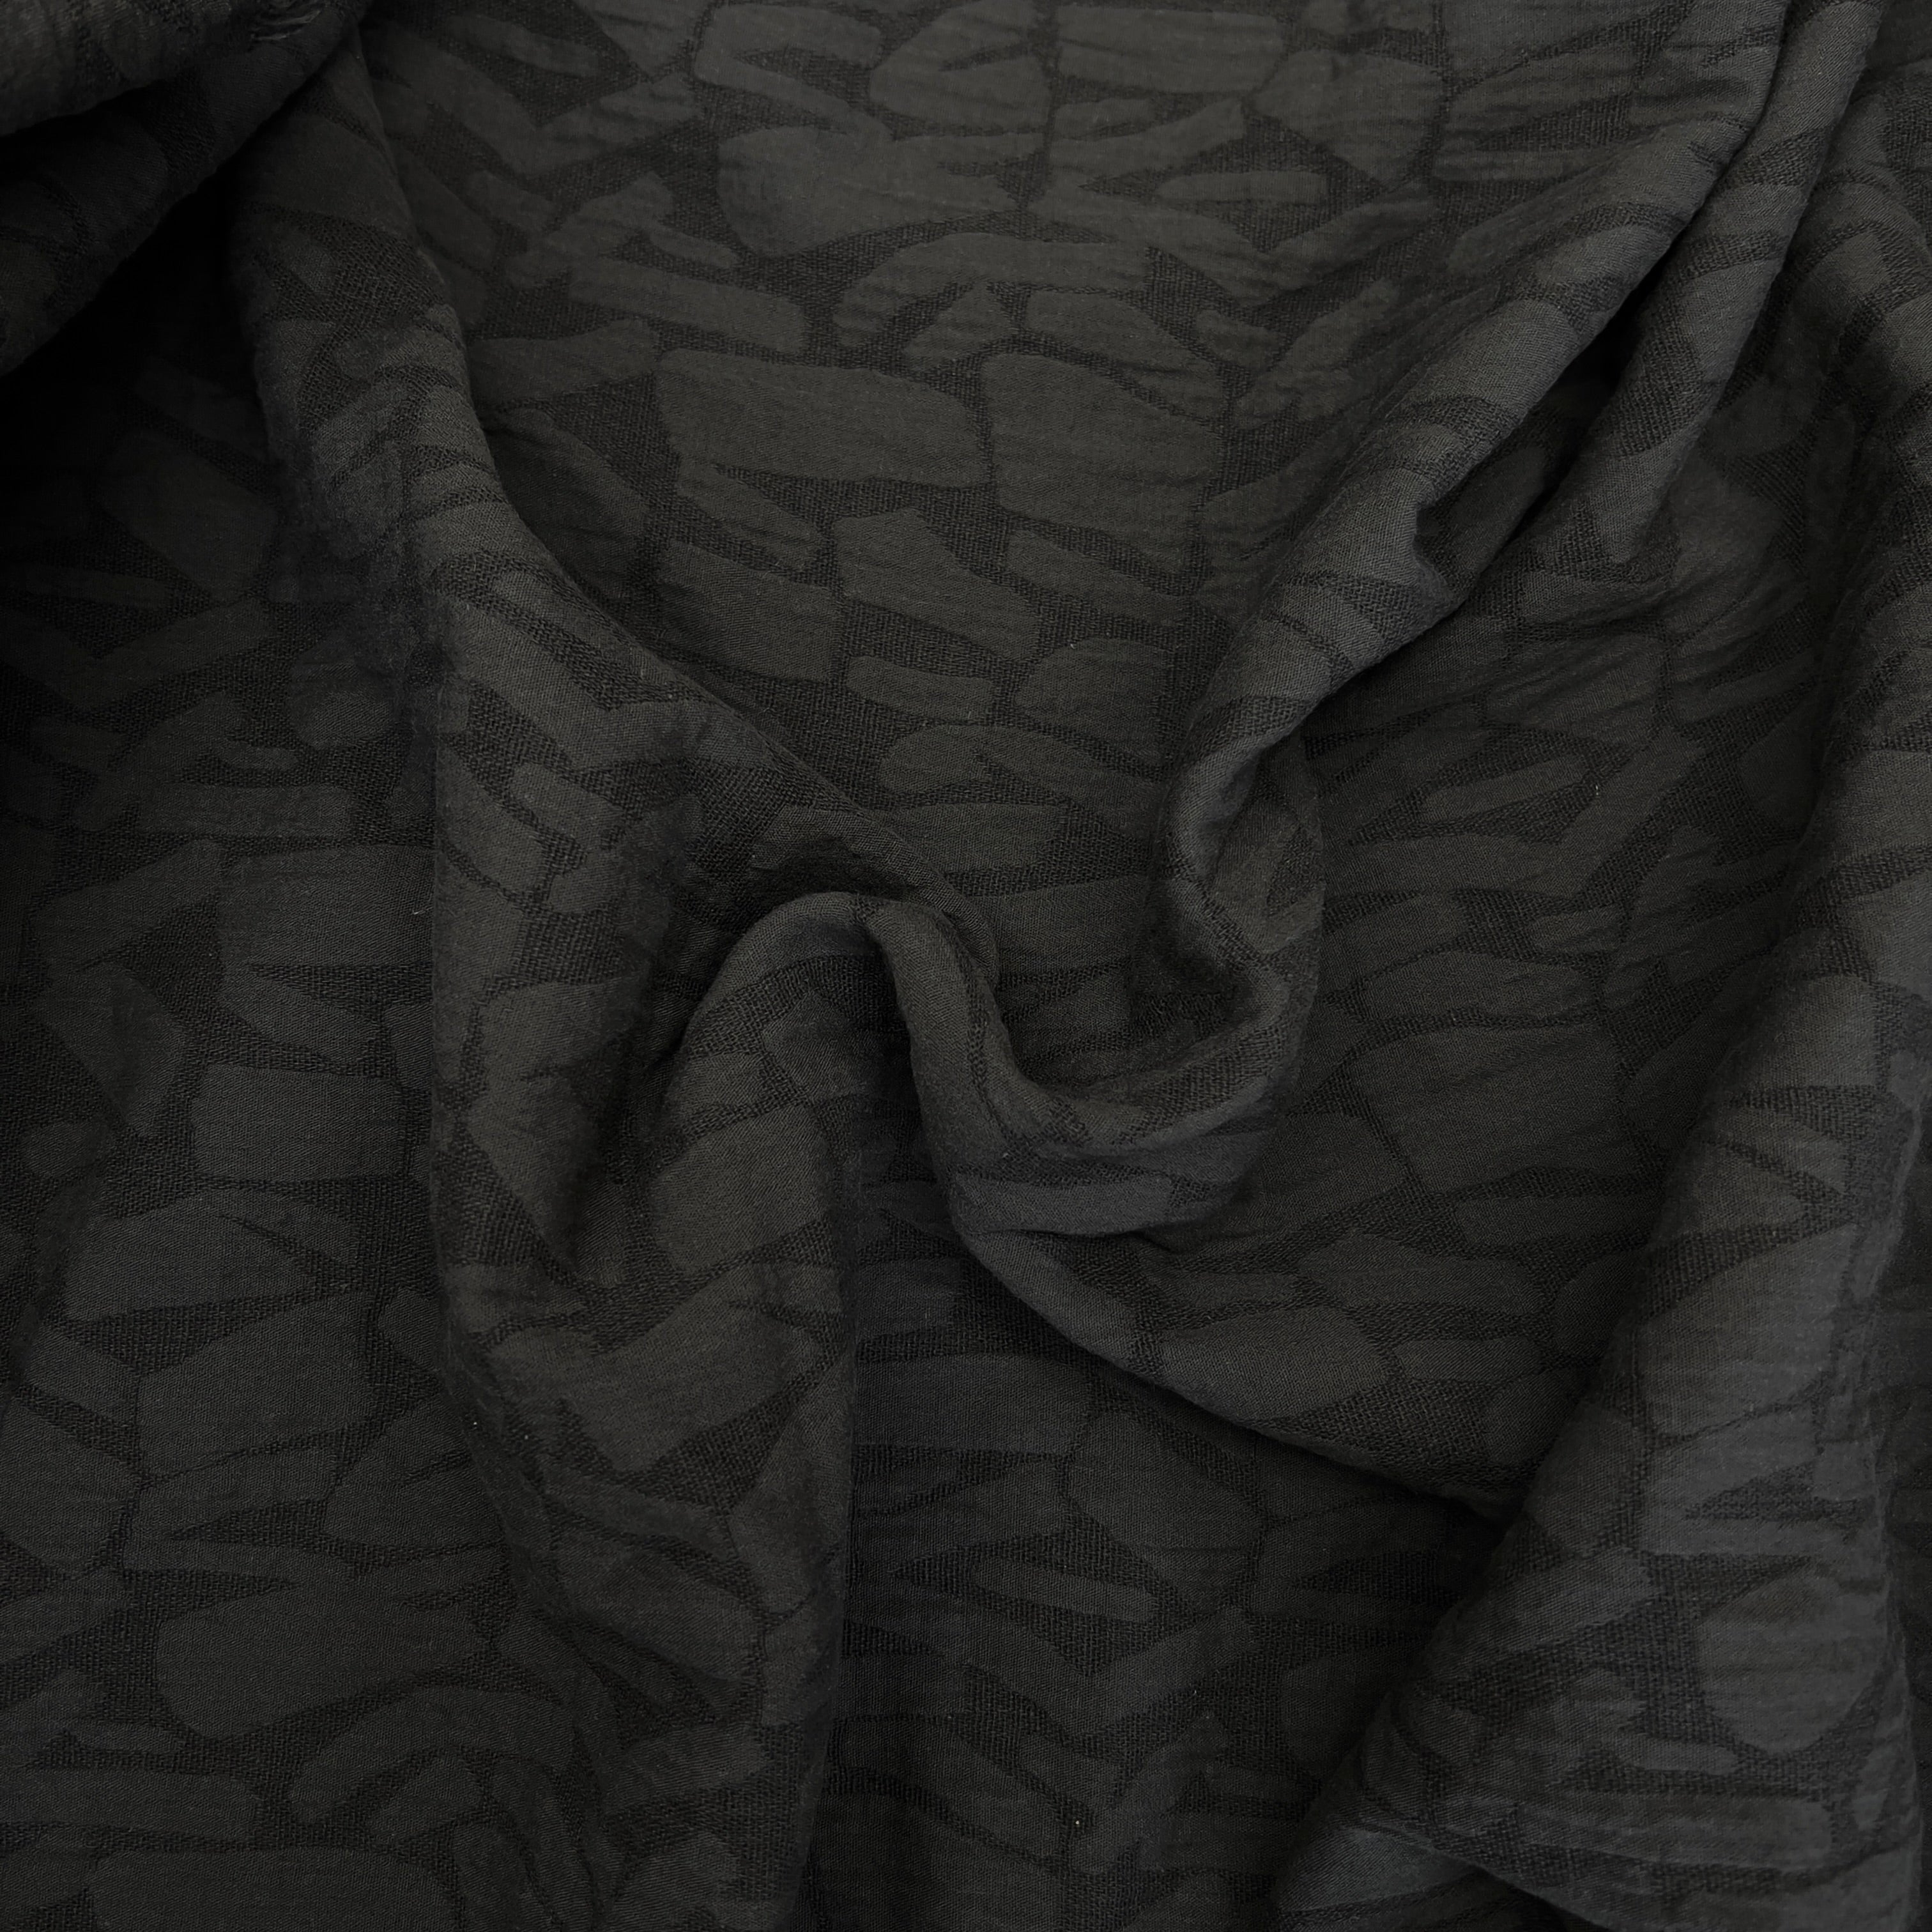 FREE SHIPPING!!! Black on Black Leopard Jacquard Knit Jacquard Fabric, DIY  Projects by the Yard 